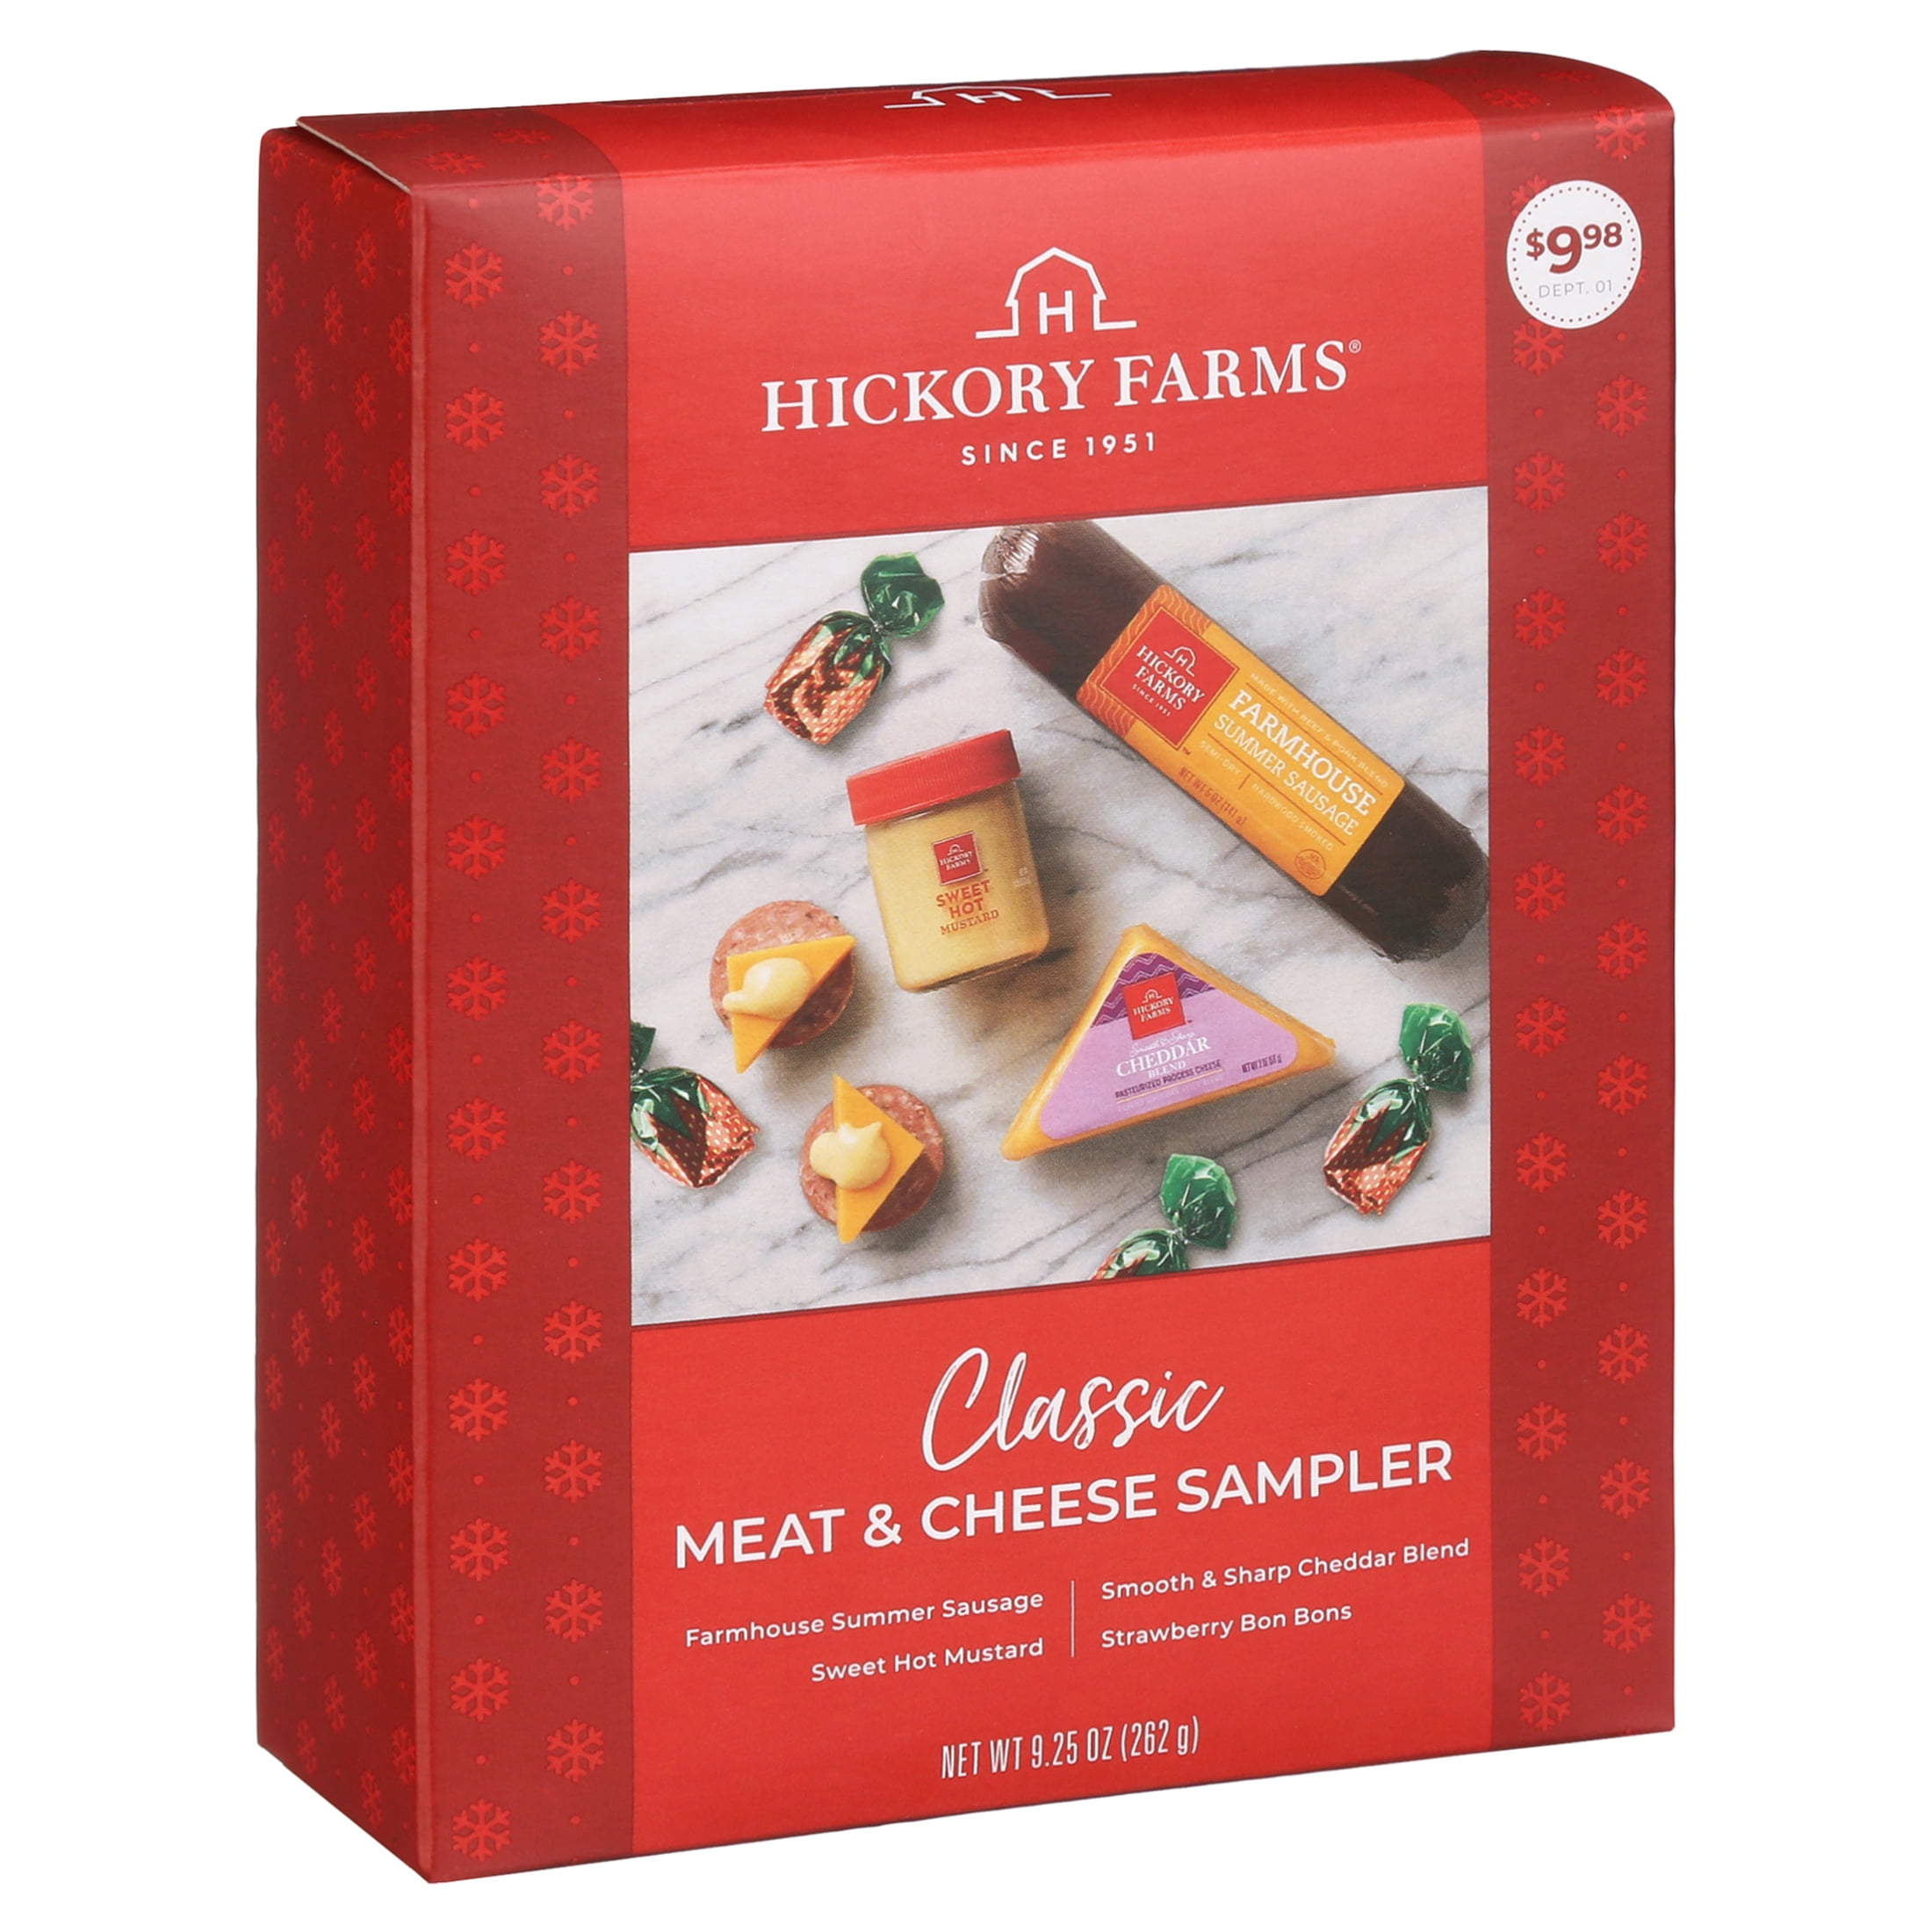  Hickory Farms Hot & Spicy Beef Sampler Gift Box with Added Bon  Bons, 2 Spicy Summer Sausages, Jalepeno Cheddar and Smoked Cheddar Cheeses,  Srirachi Mustard and Sweet Strawberry Bon Bons! 